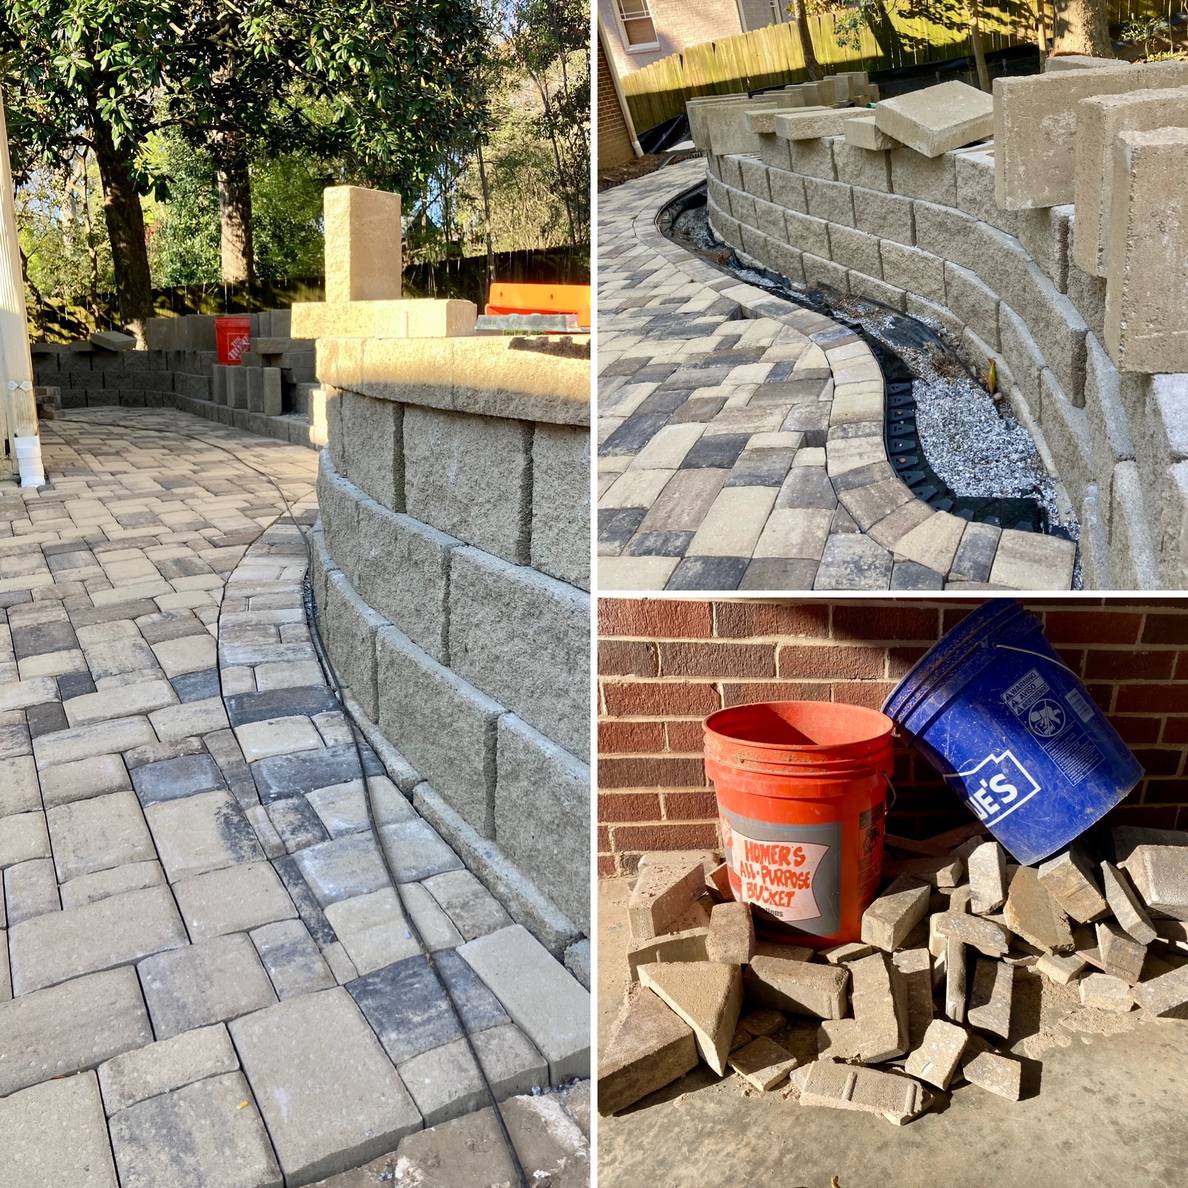 3 pictures: two are of the edging of a paver patio and walkway. One is of a pile of stone offcuts.